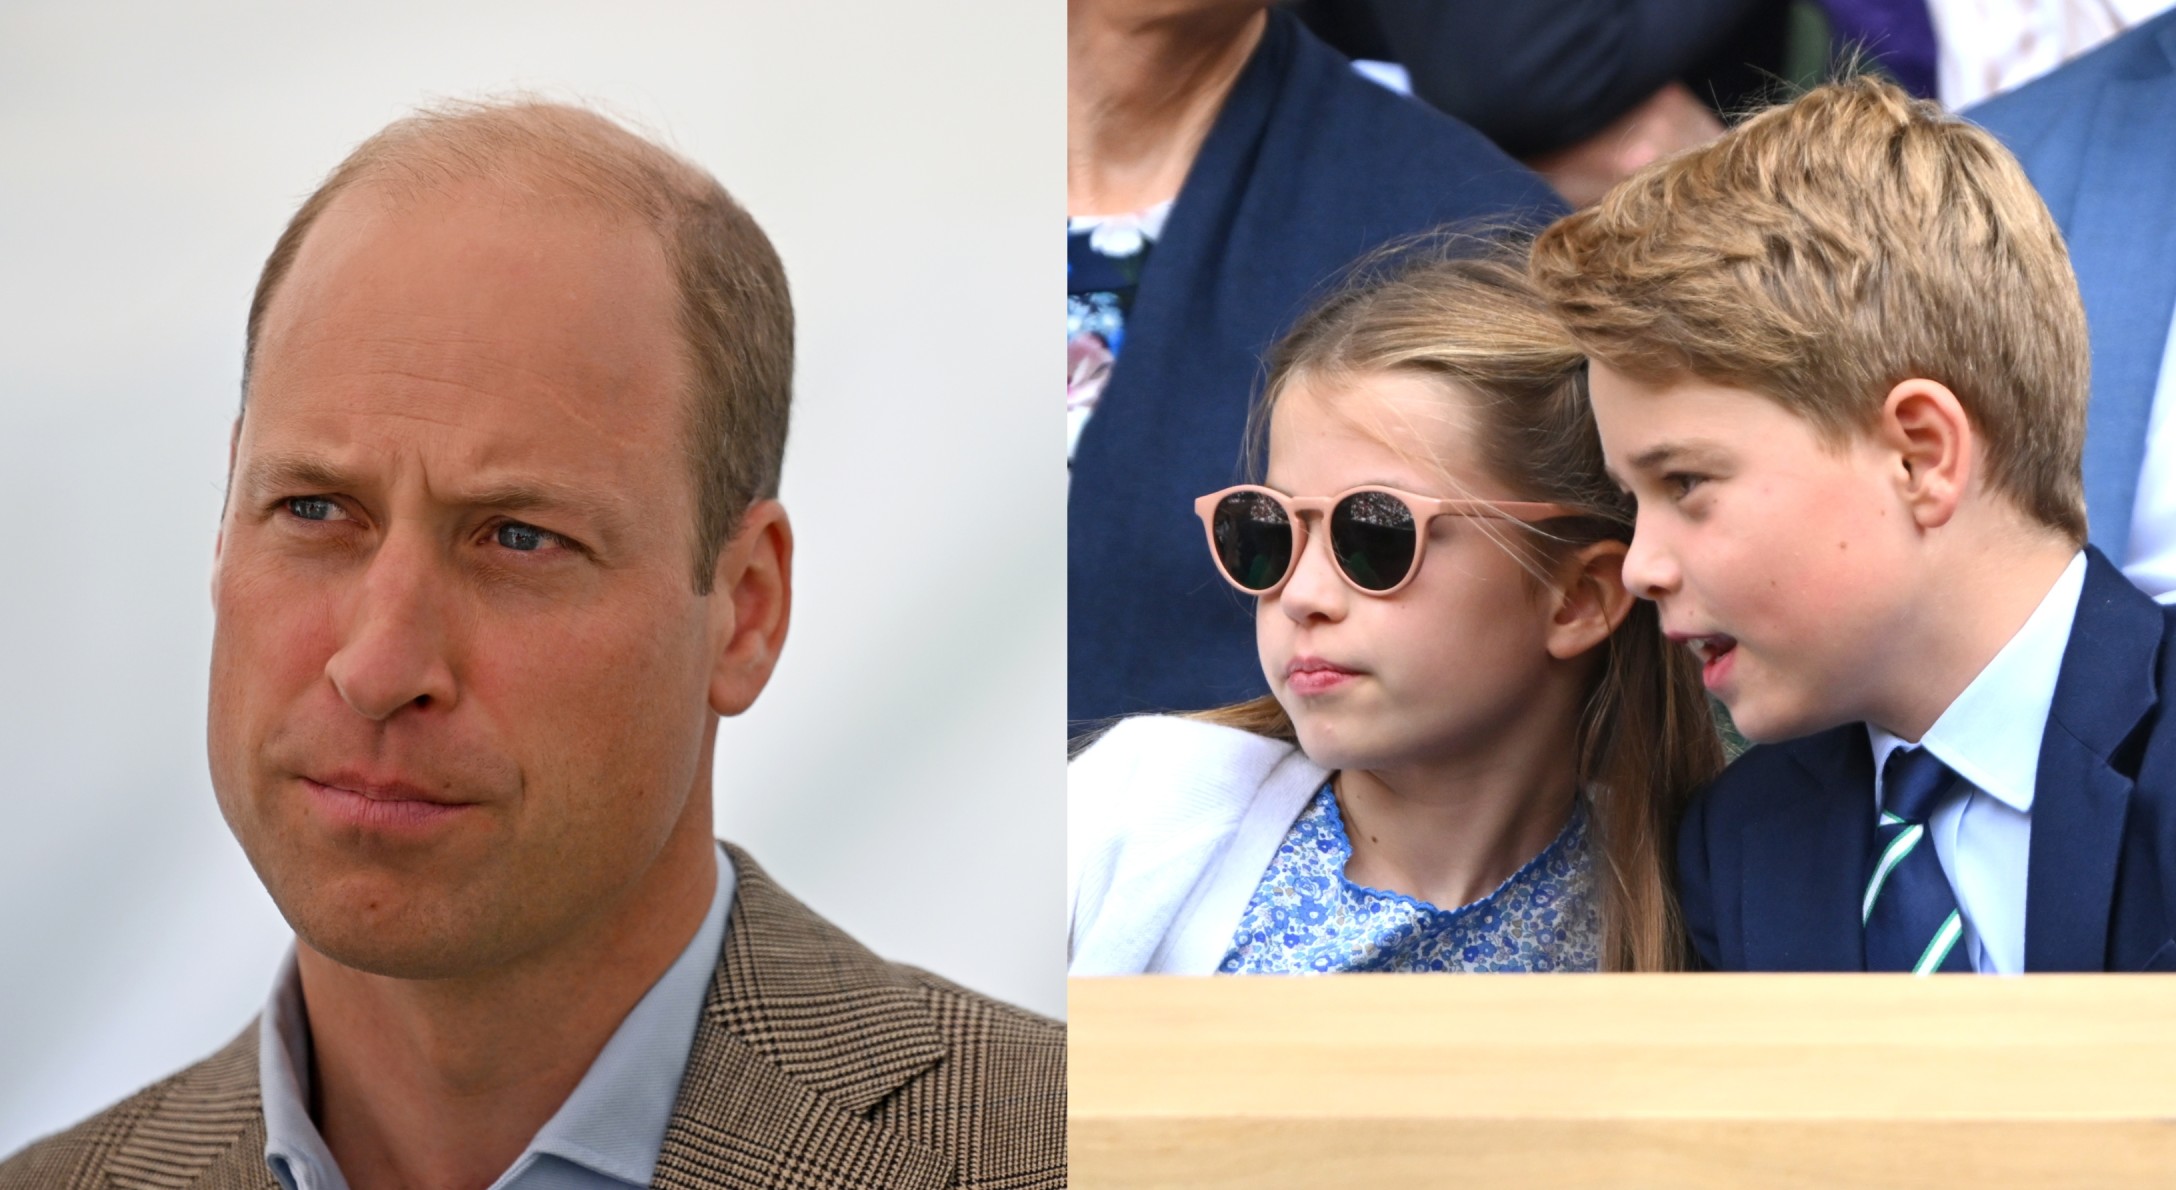 Prince William Brought His 3 Kids Classic NYC Souvenirs & We Love it for Them